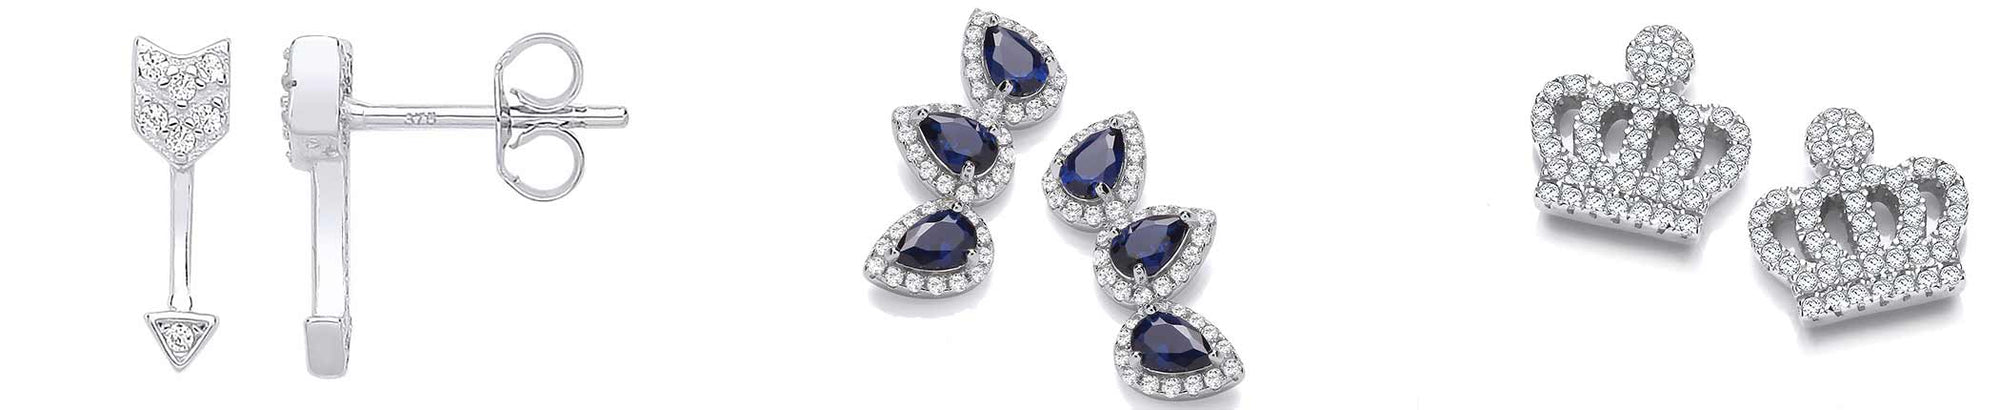 <font color=#000000>10 Questions and Answers about Cubic Zirconia Stud Earrings</font>